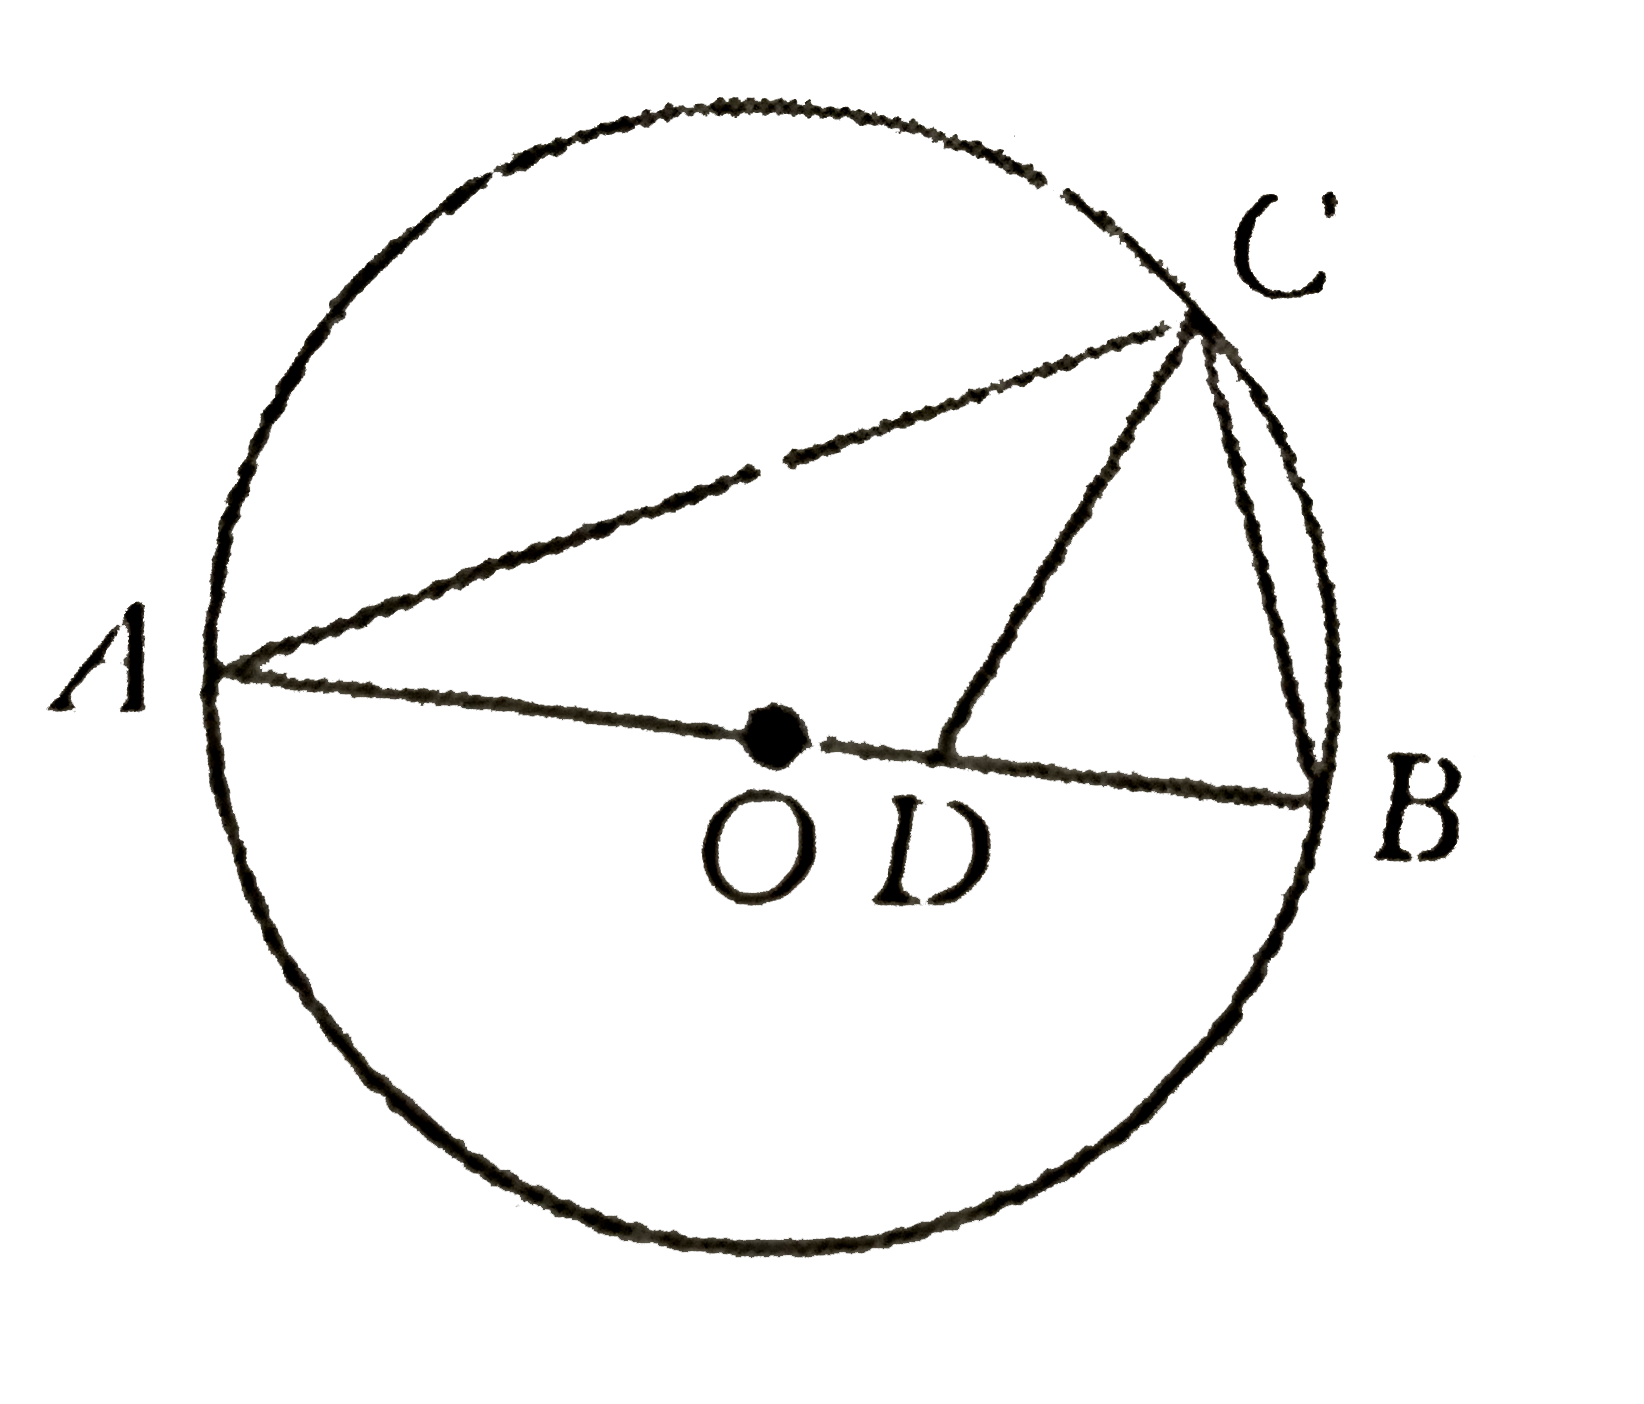 In the given figure, AB is the diameter and /ADC = 2 /BDC. If / BCD =70^(@), then find the angle made by AC at the centre of the circle.